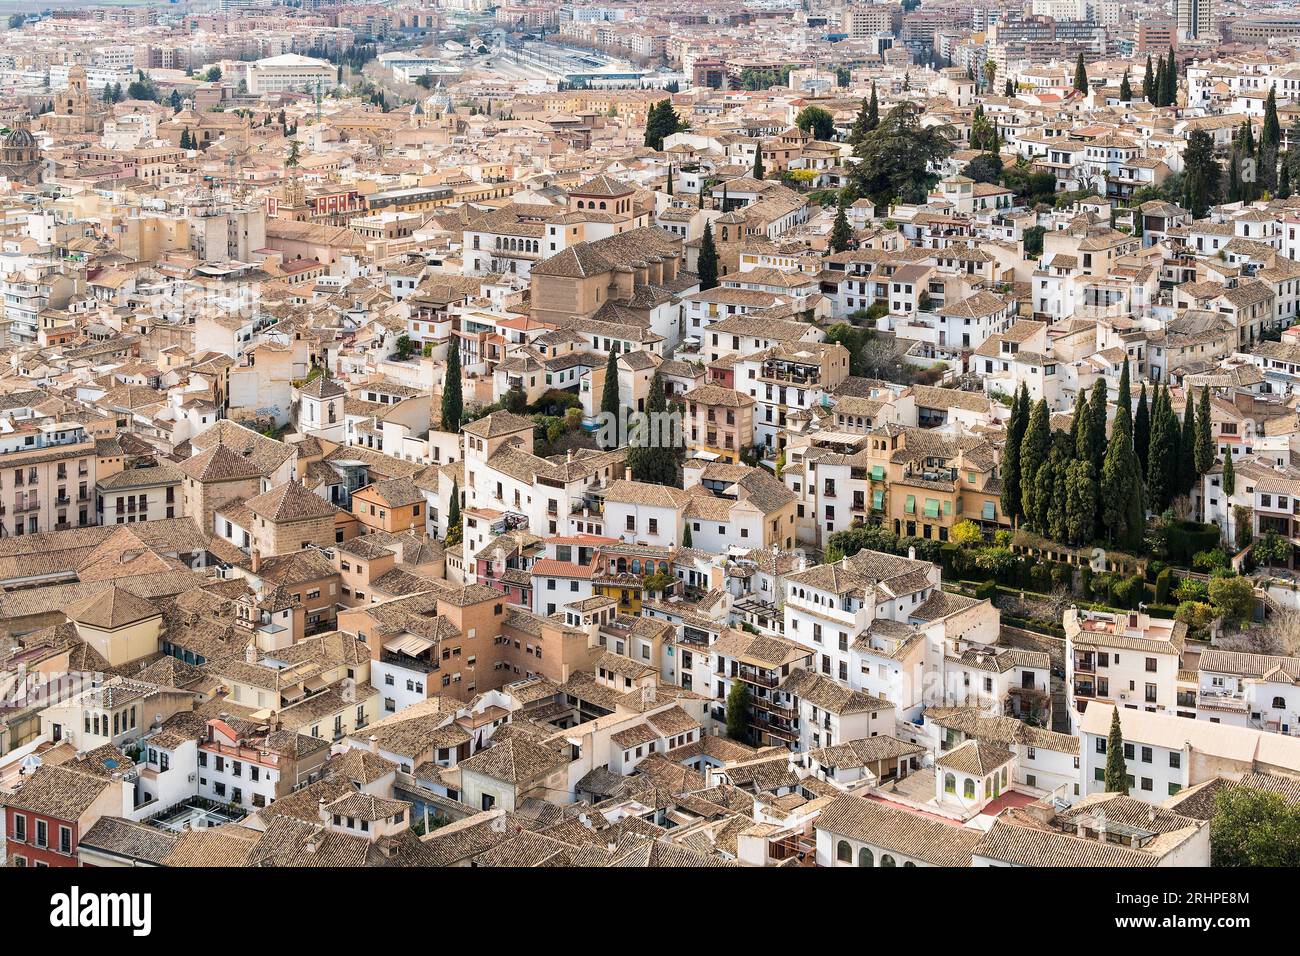 Spain, Andalusia, Granada, Albaicin, clutter of houses Stock Photo